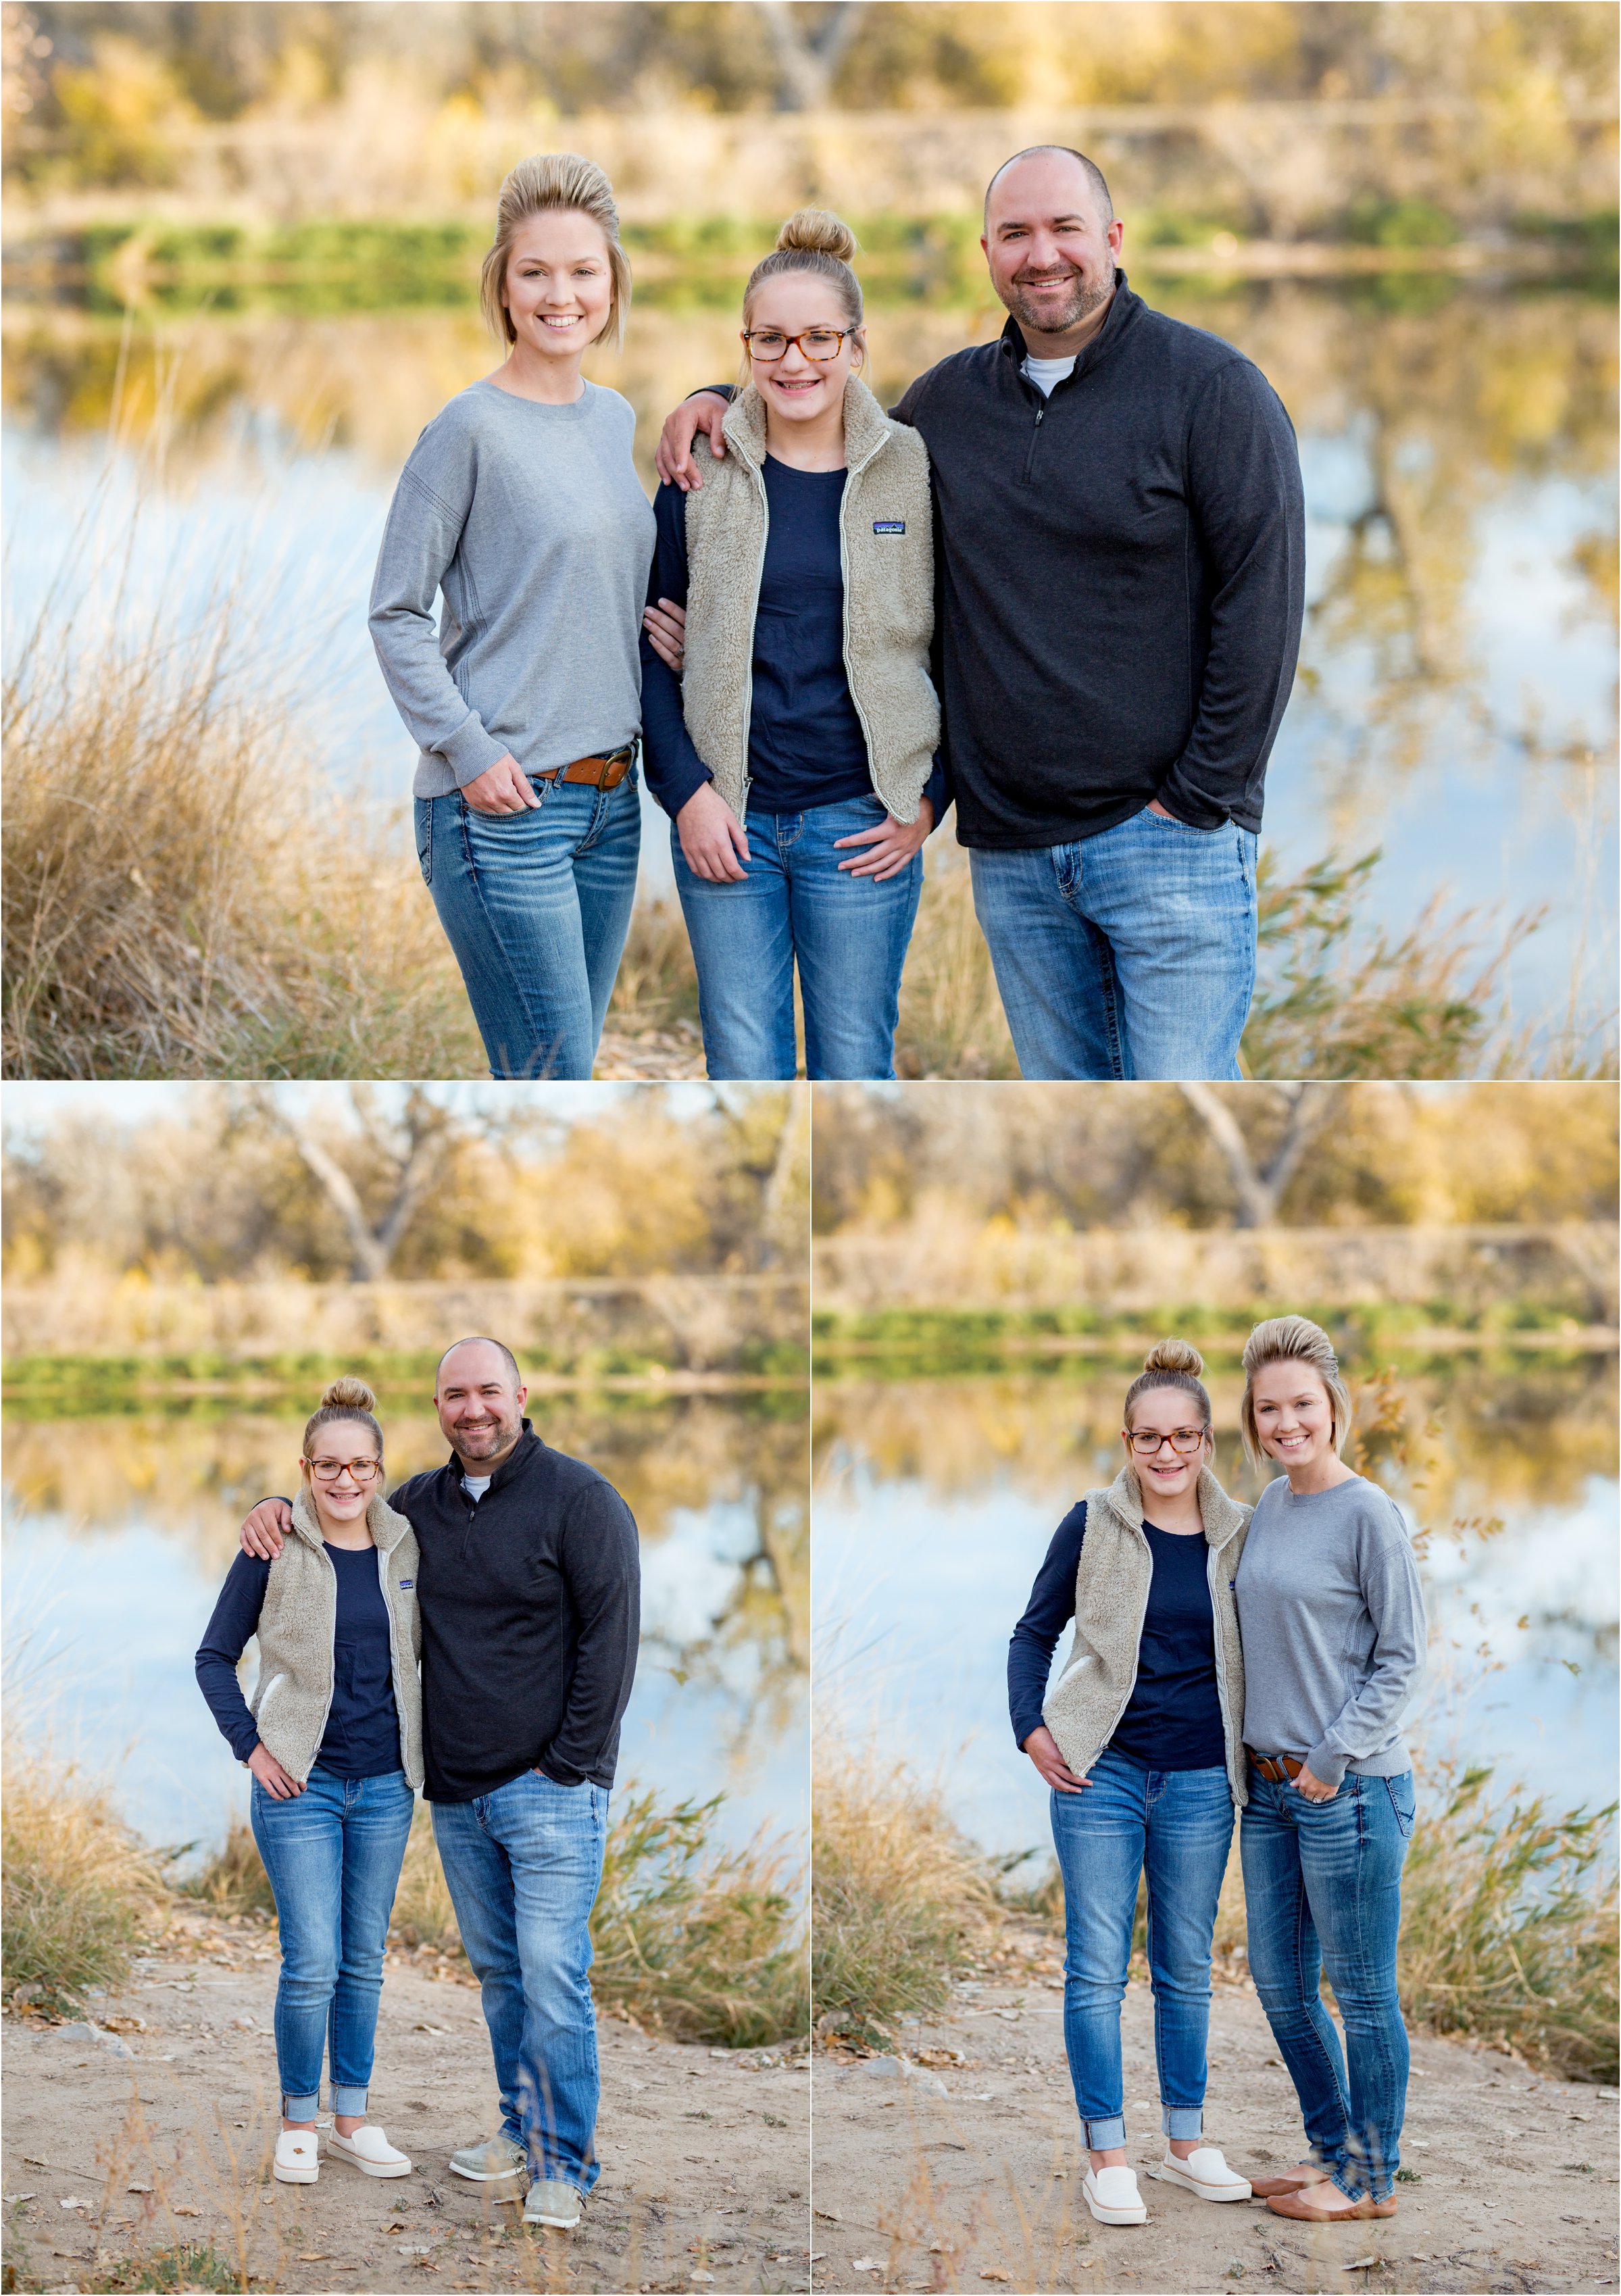 Greeley and Evans, Colorado Family Session by Greeley, Colorado Portrait and Wedding Photographer